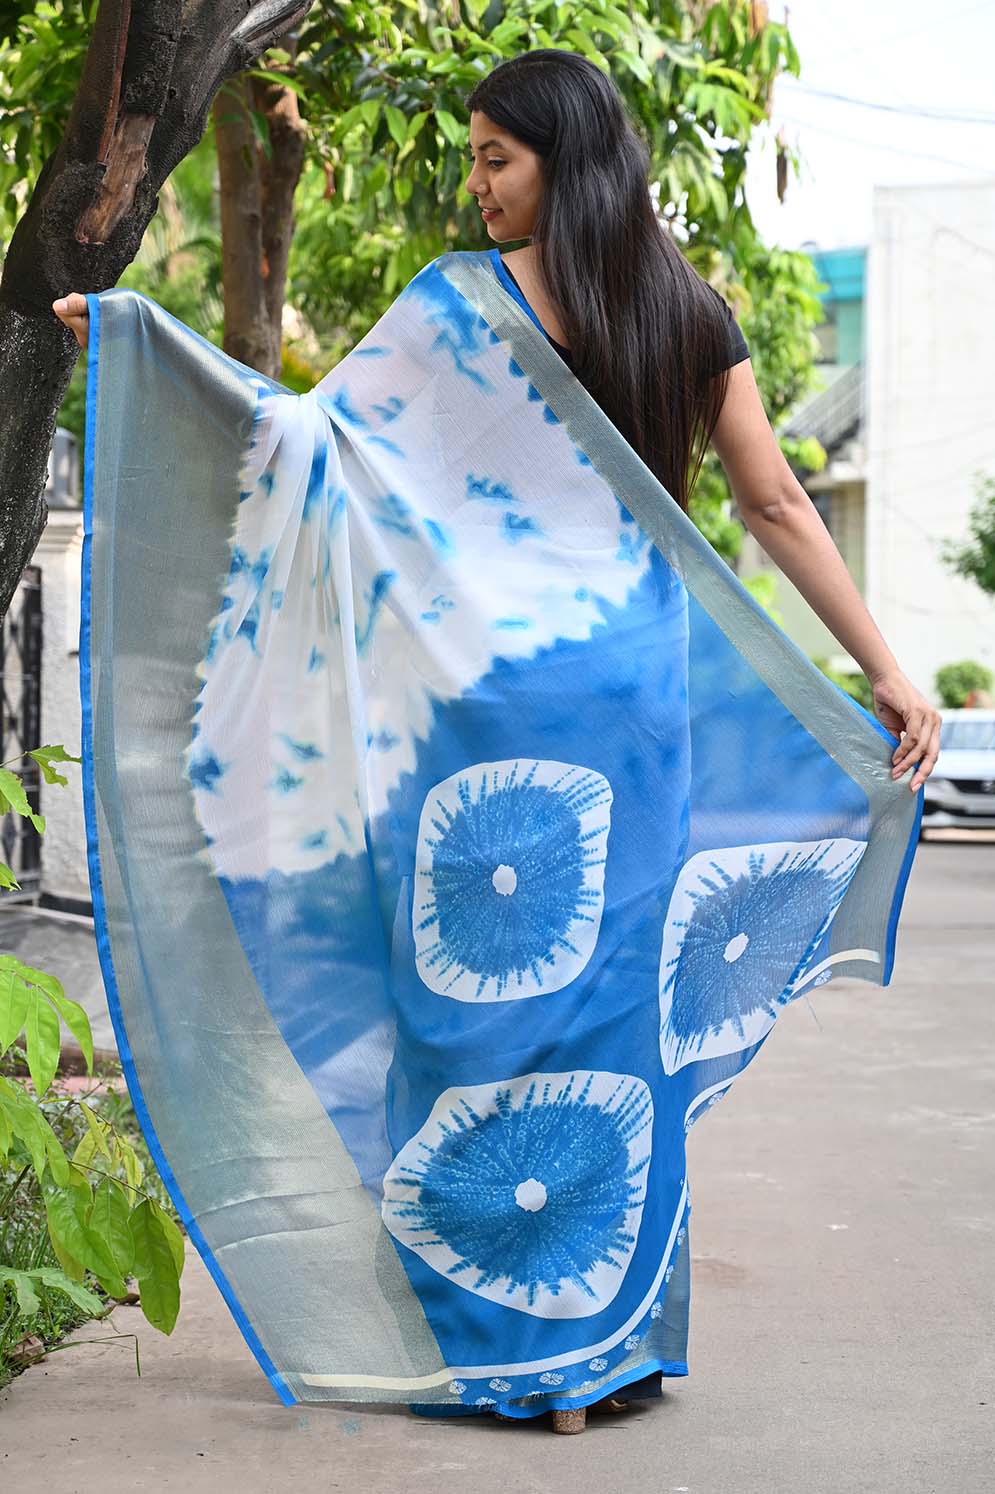 Ready to wear Moss Chiffon Blue Marble Tie & Die With Broad Woven Zari Border Wrap in 1 minute saree - Isadora Life